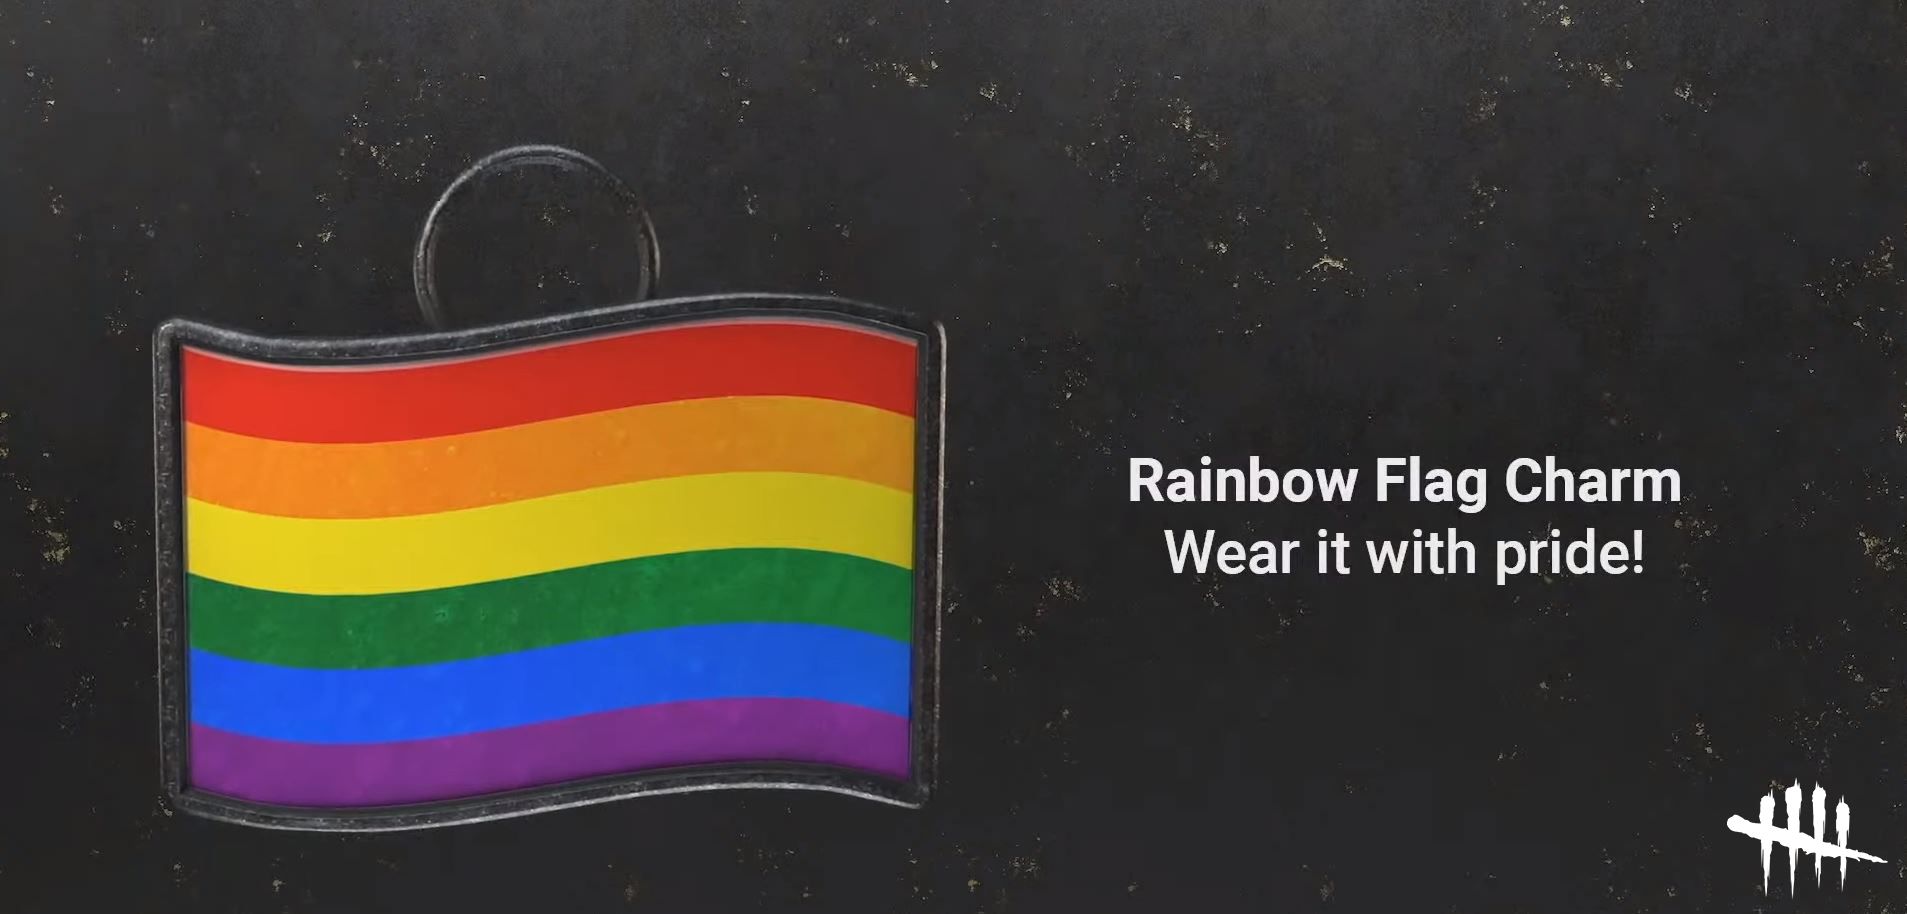 Dead By Daylight's rainbow flag charm for Pride